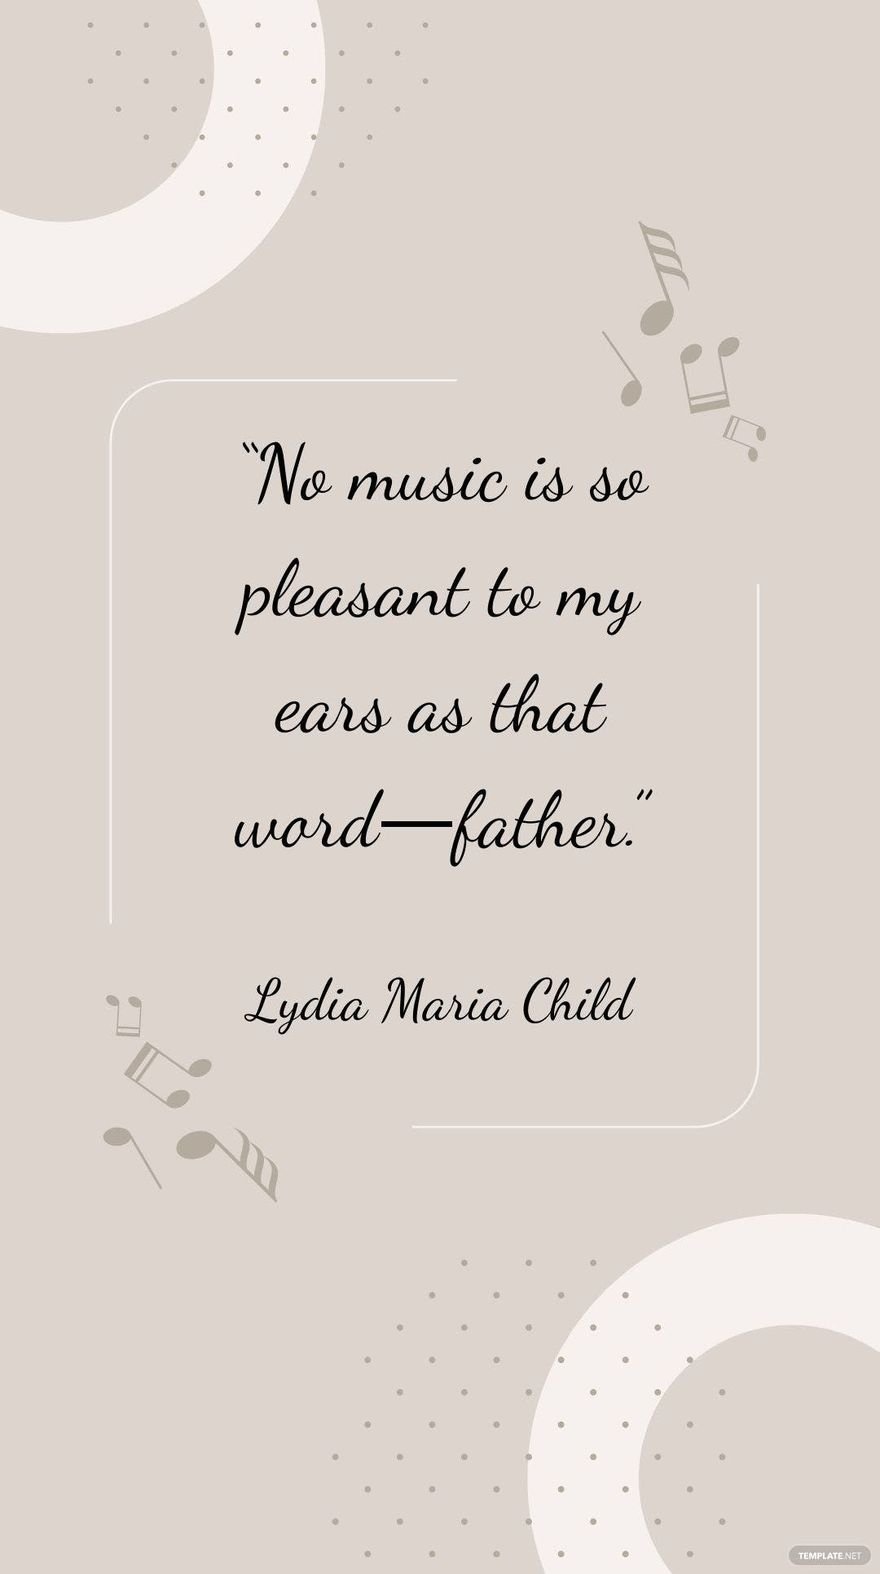 Lydia Maria Child - “No music is so pleasant to my ears as that word father.” in JPG